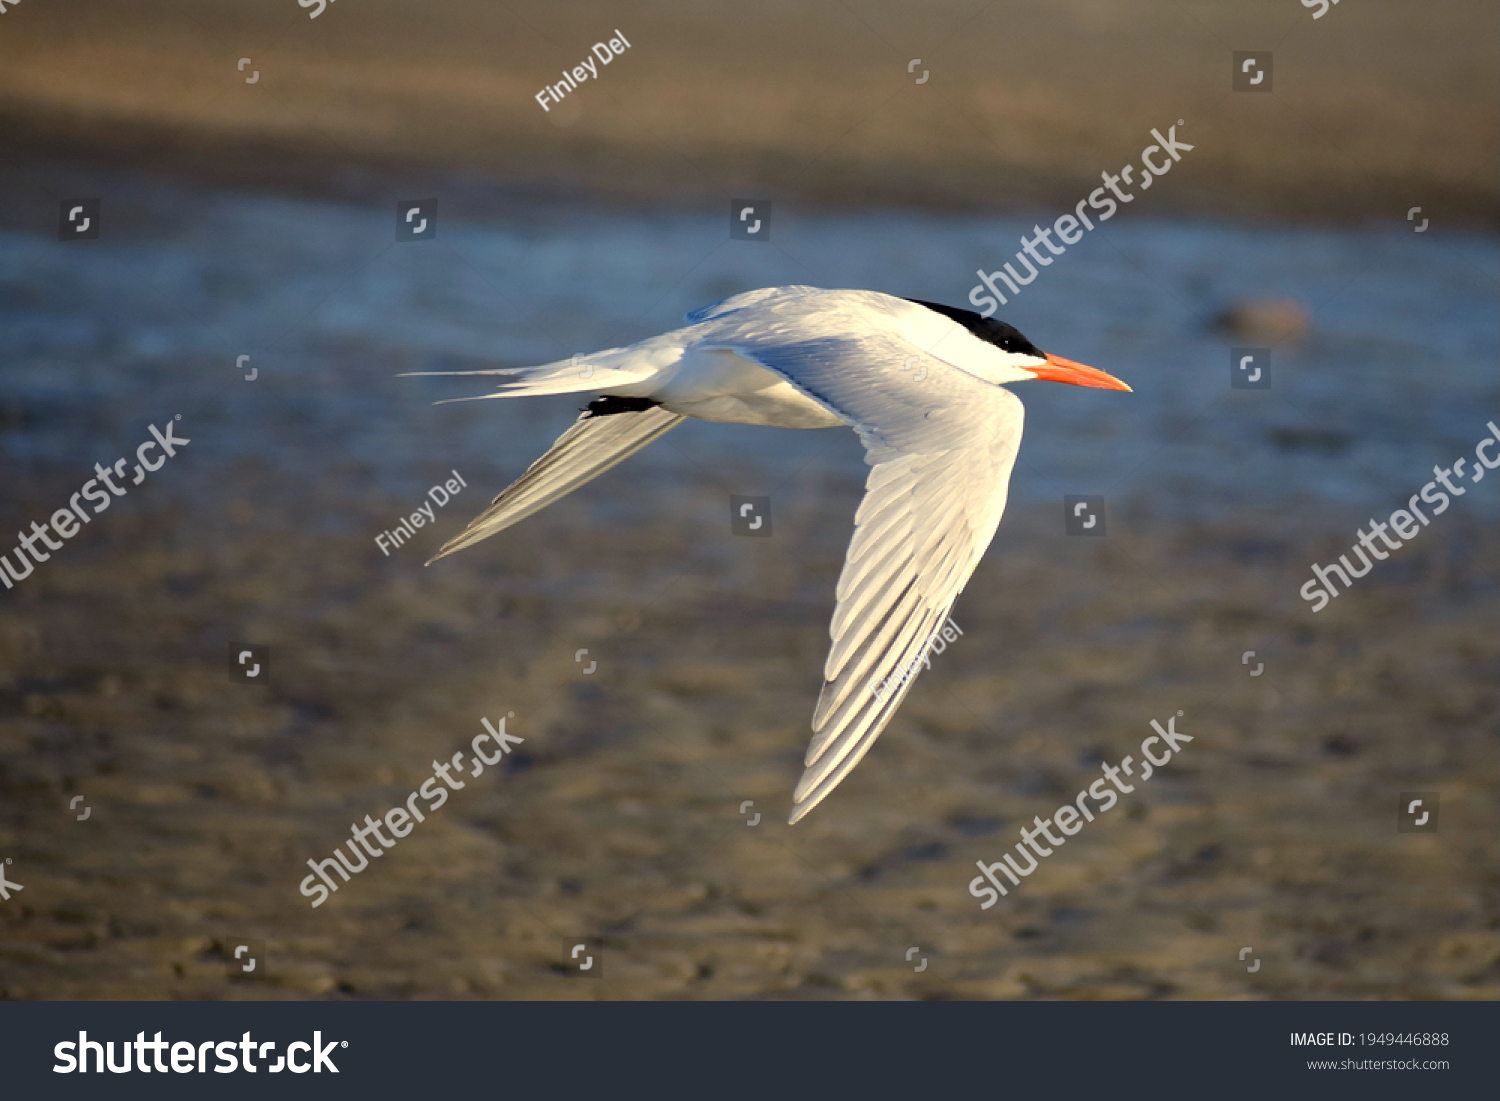 Arctic Tern flying by on the beach. #1949446888